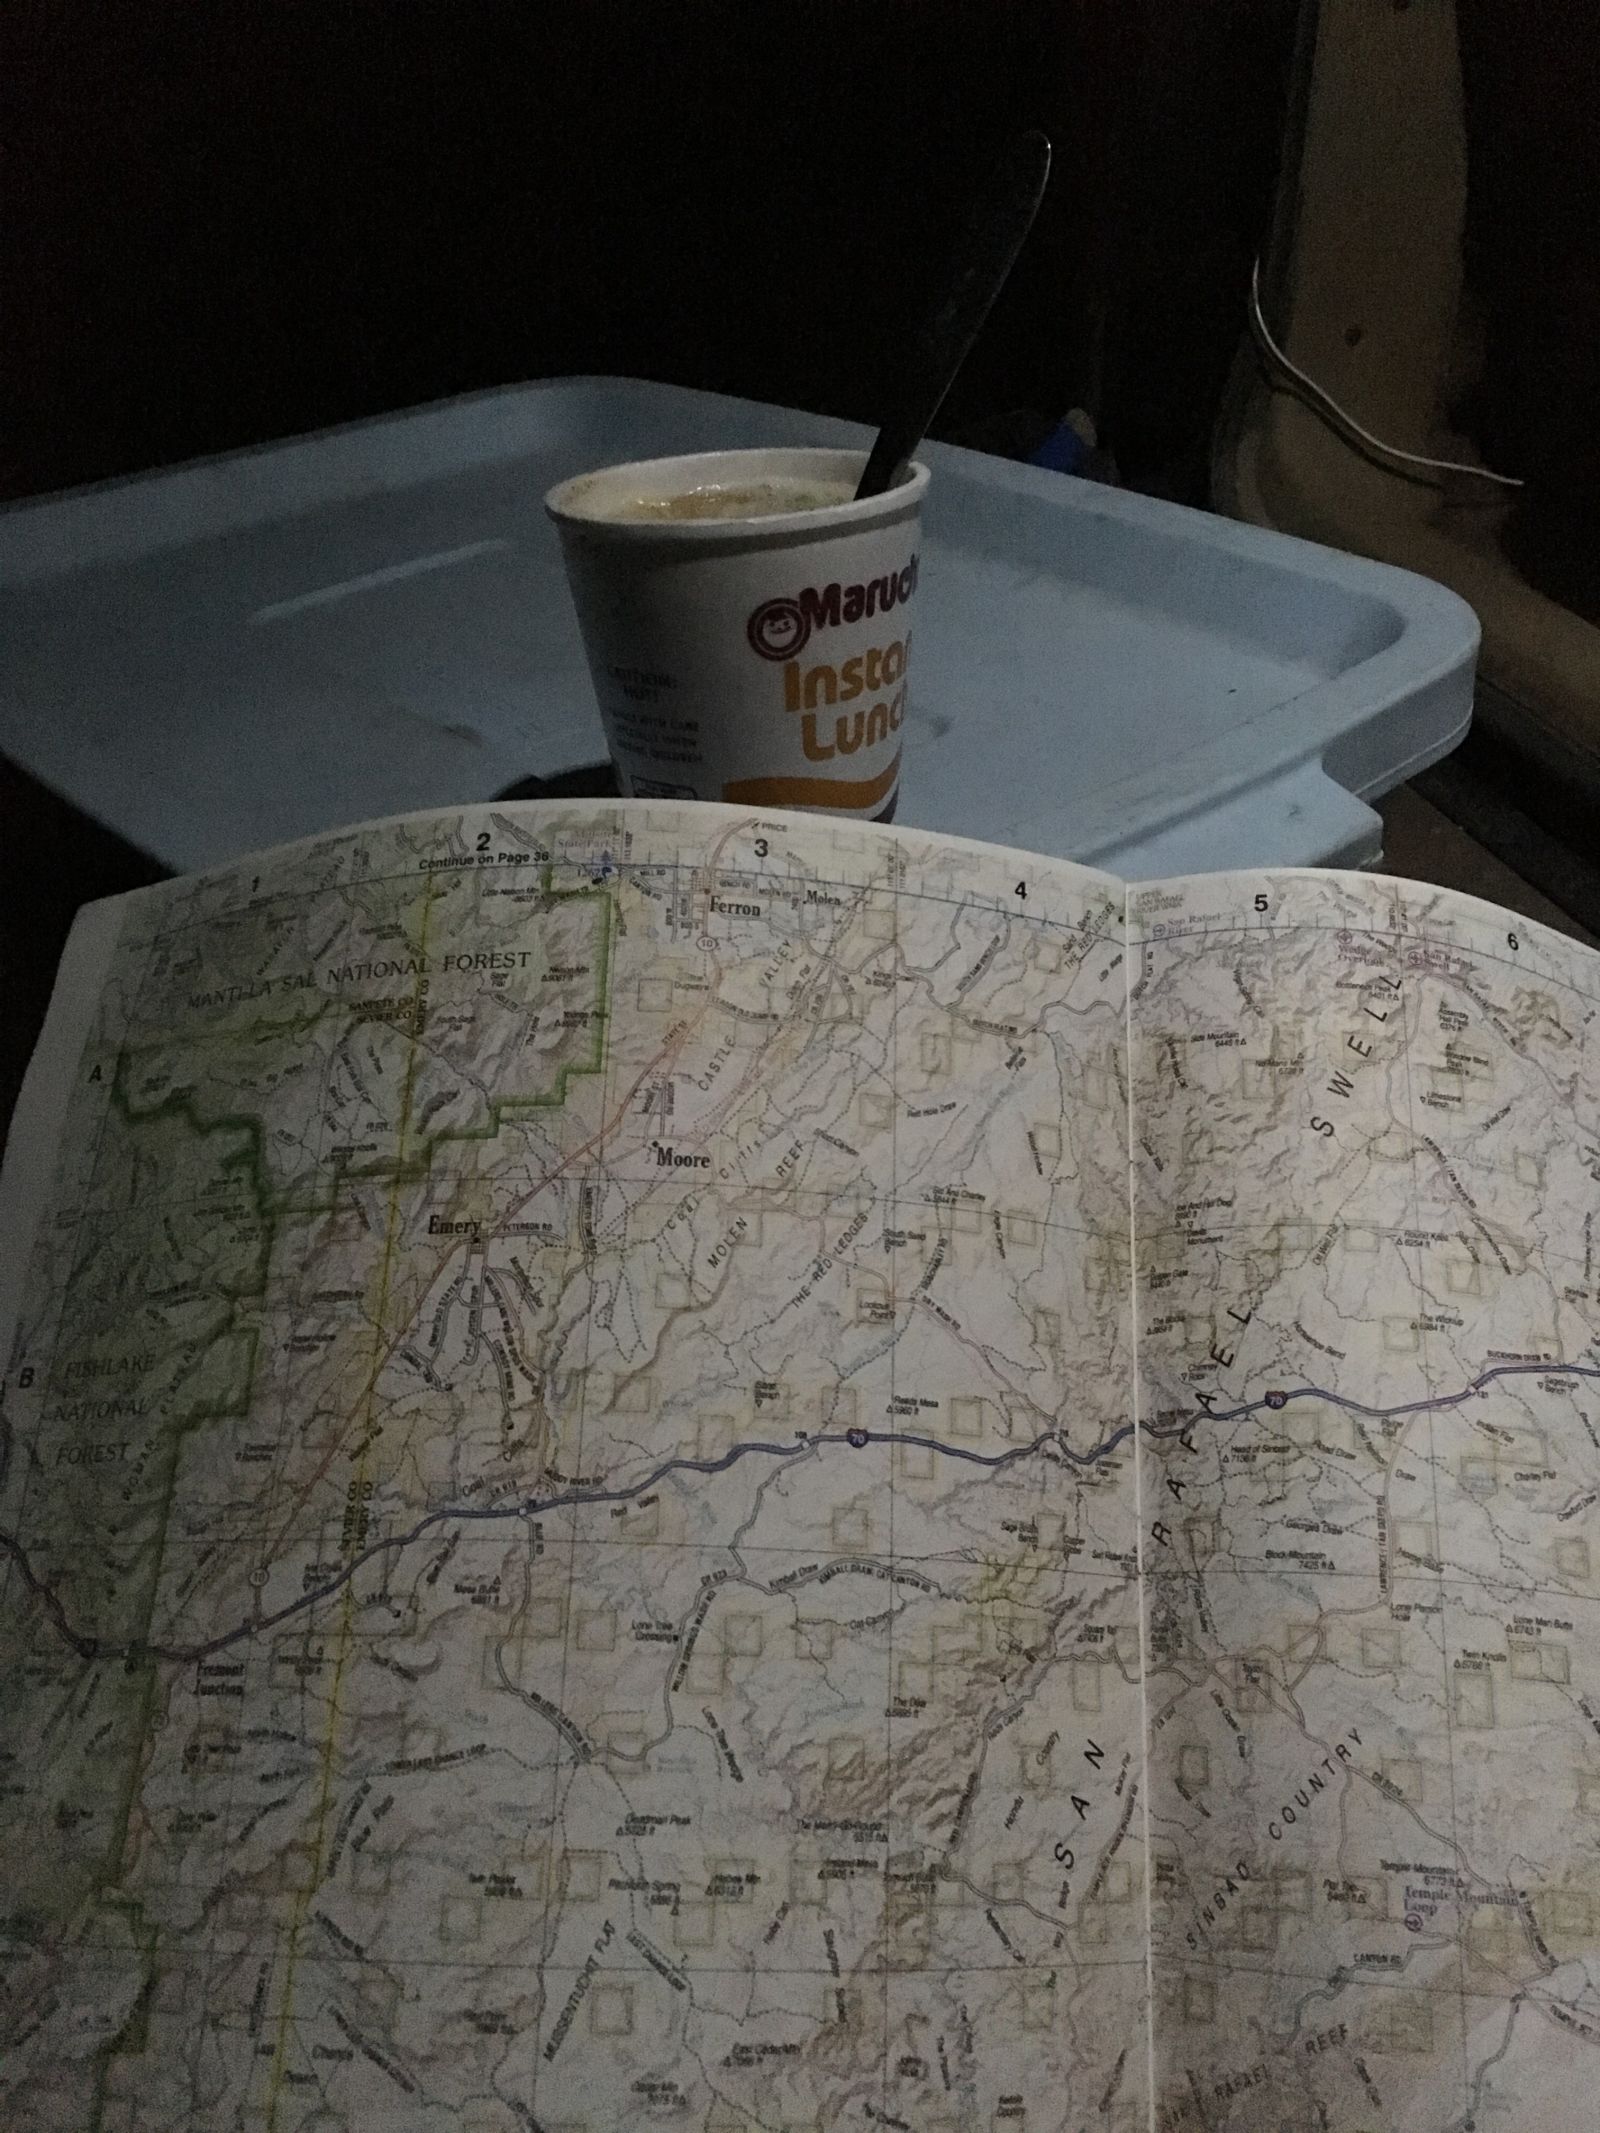 Enjoying a nutritious evening snack and plotting my fun in the warm glow of the LEDs on the hatch. Sometimes you need a big-format map to see the big picture. Always wanted to visit Sinbad Country.